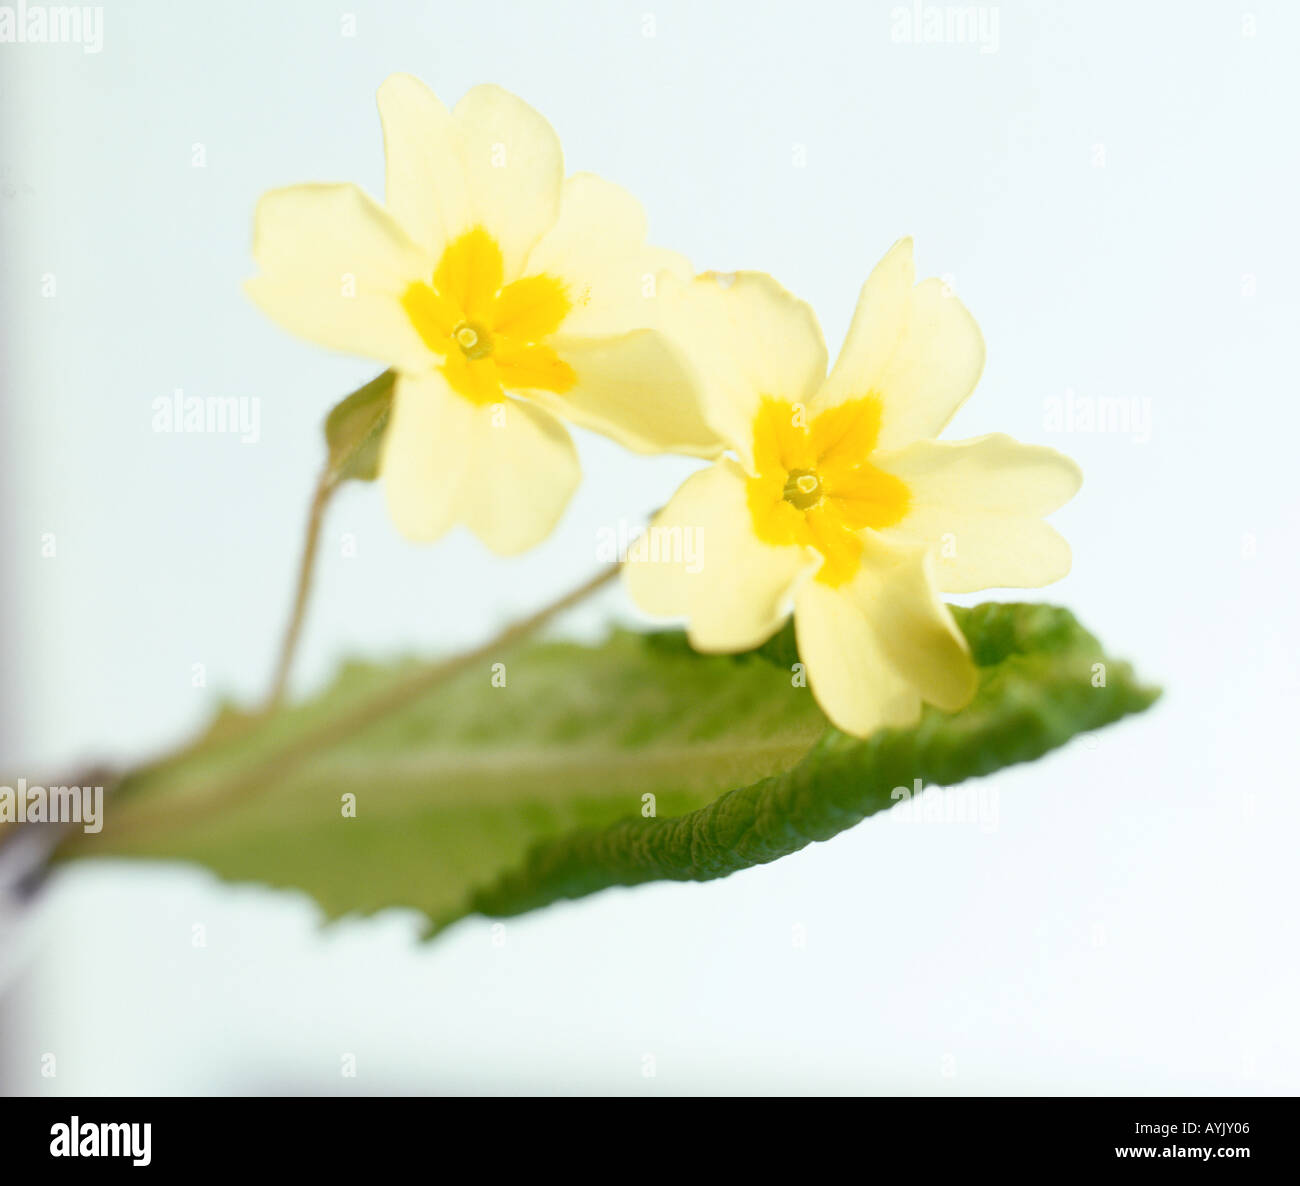 Primula vulgaris, primrose, first rose, focus on five notched, pale yellow, single flowers with deep yellow centres, Stock Photo